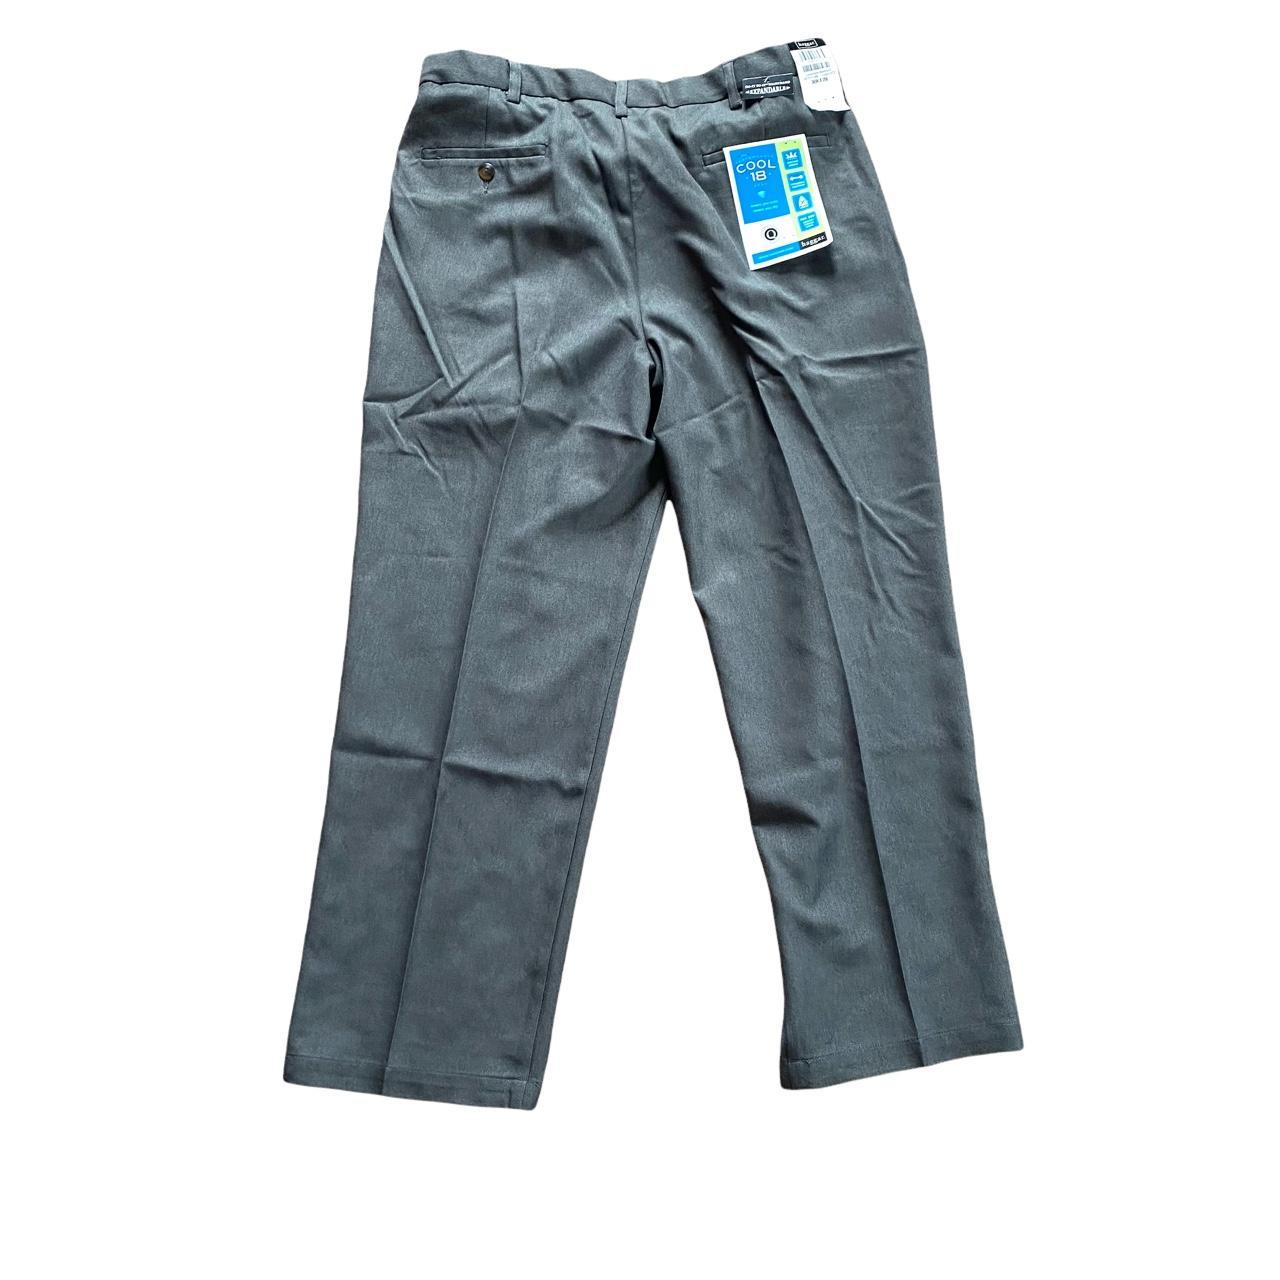 Product Image 3 - This is a pair of